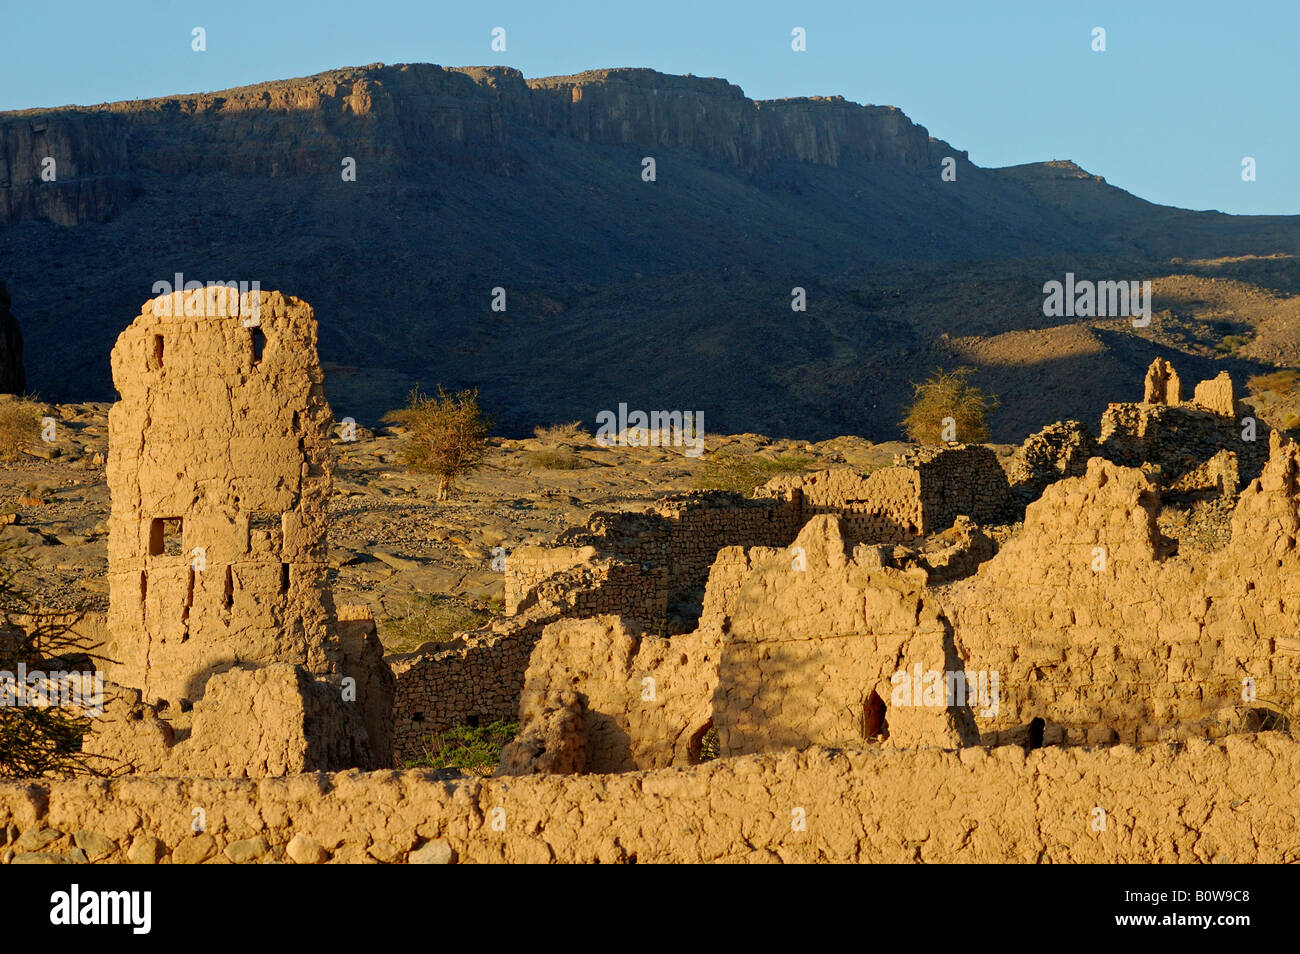 Ruins, abandoned village Tanuf, Oman, Middle East Stock Photo